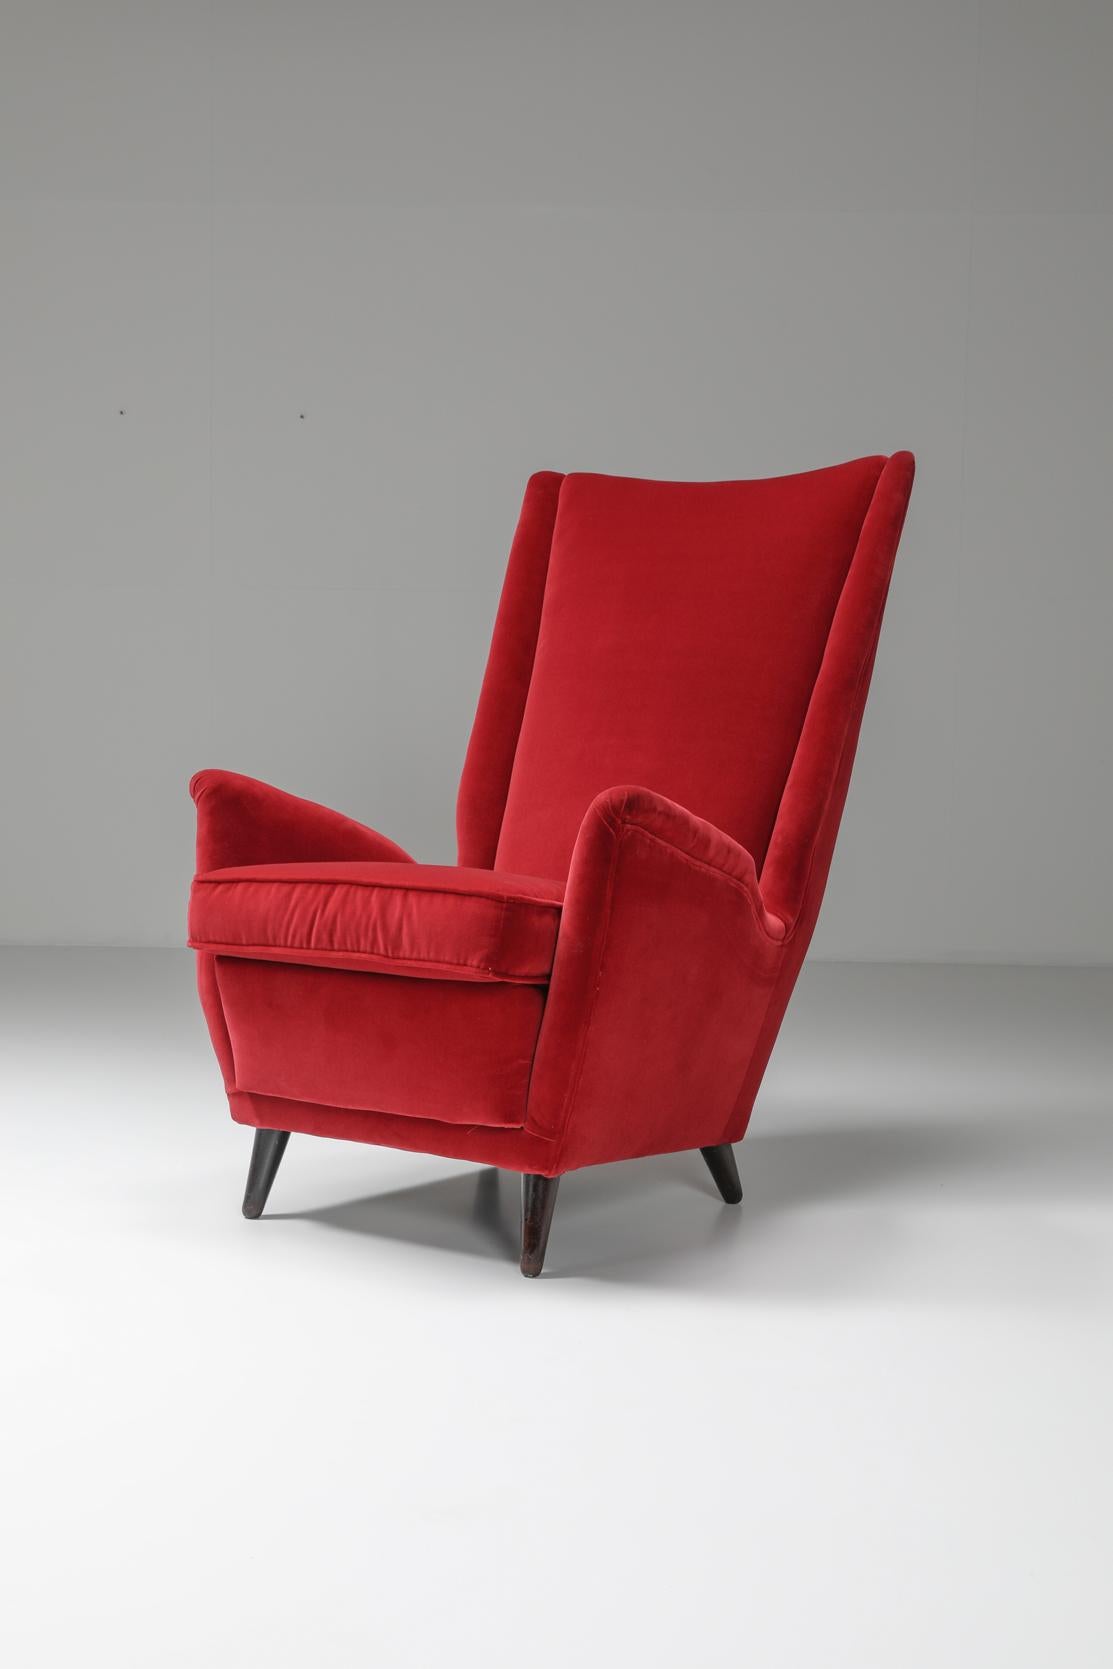 Italian Wingback Armchair in Red Velvet by Gio Ponti, 1950s For Sale 2